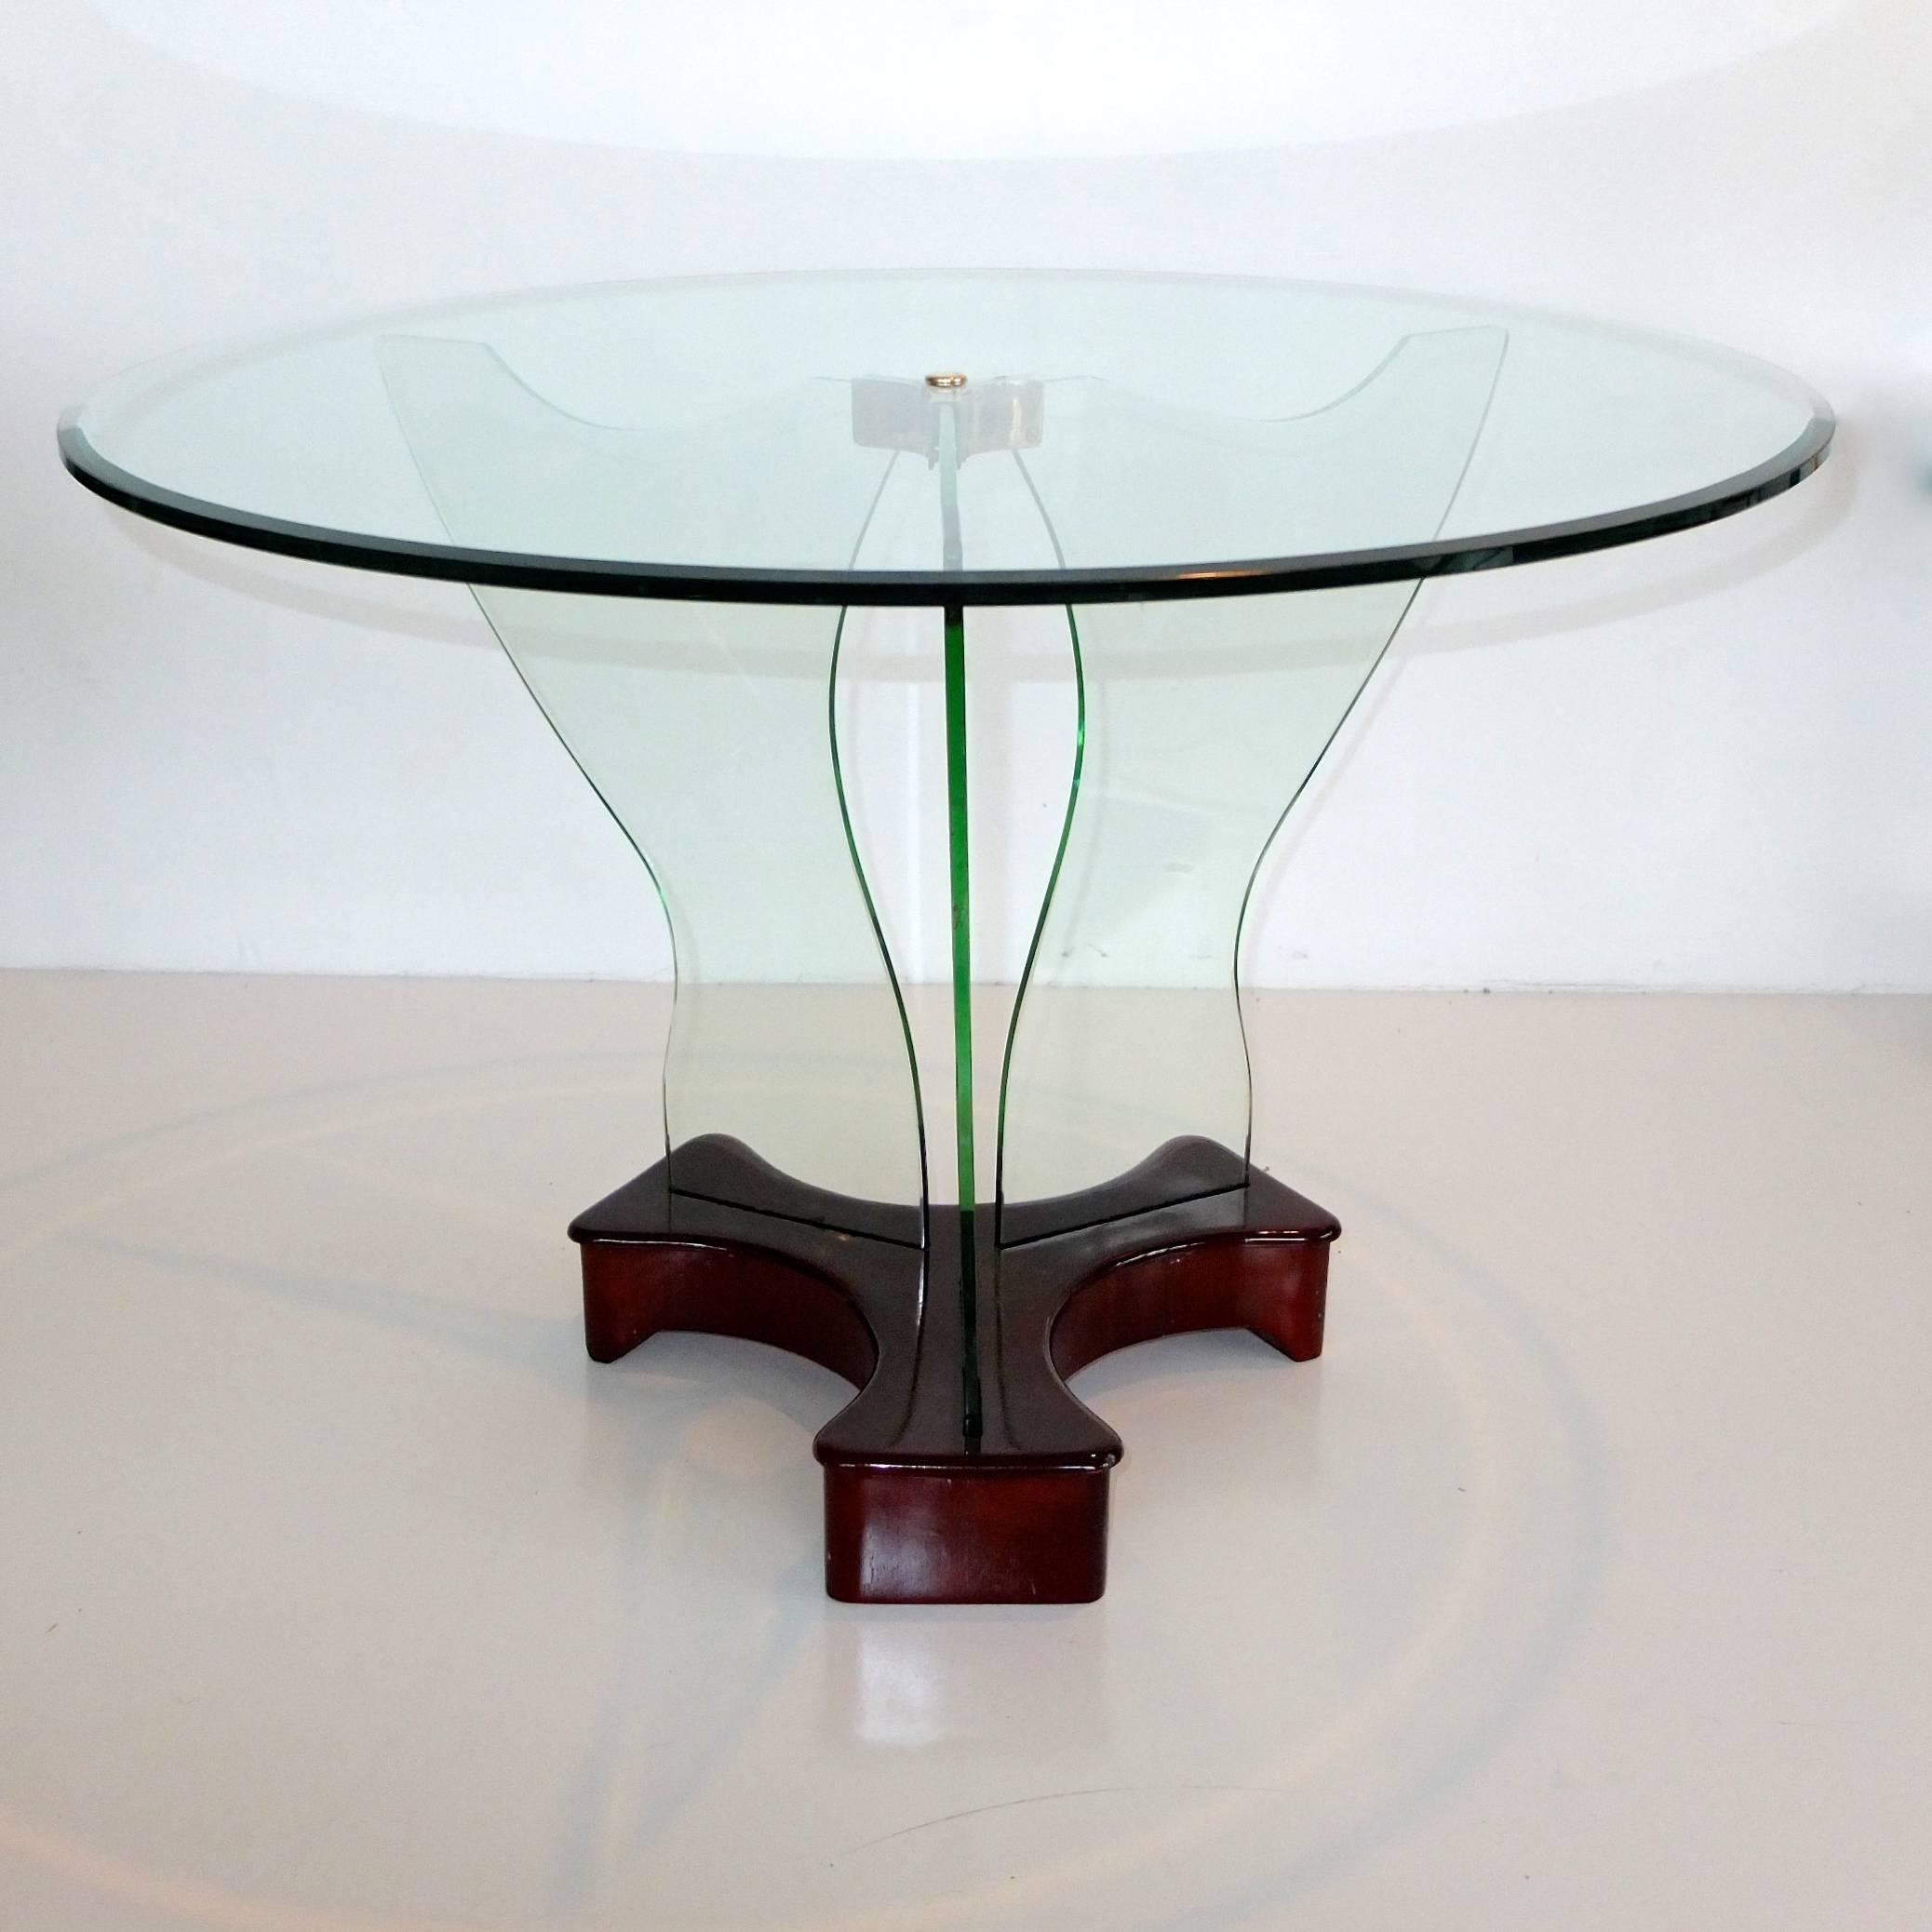 Luigi Brusotti 1930s Glass, Brass and Mahogany Cocktail Table For Sale 3